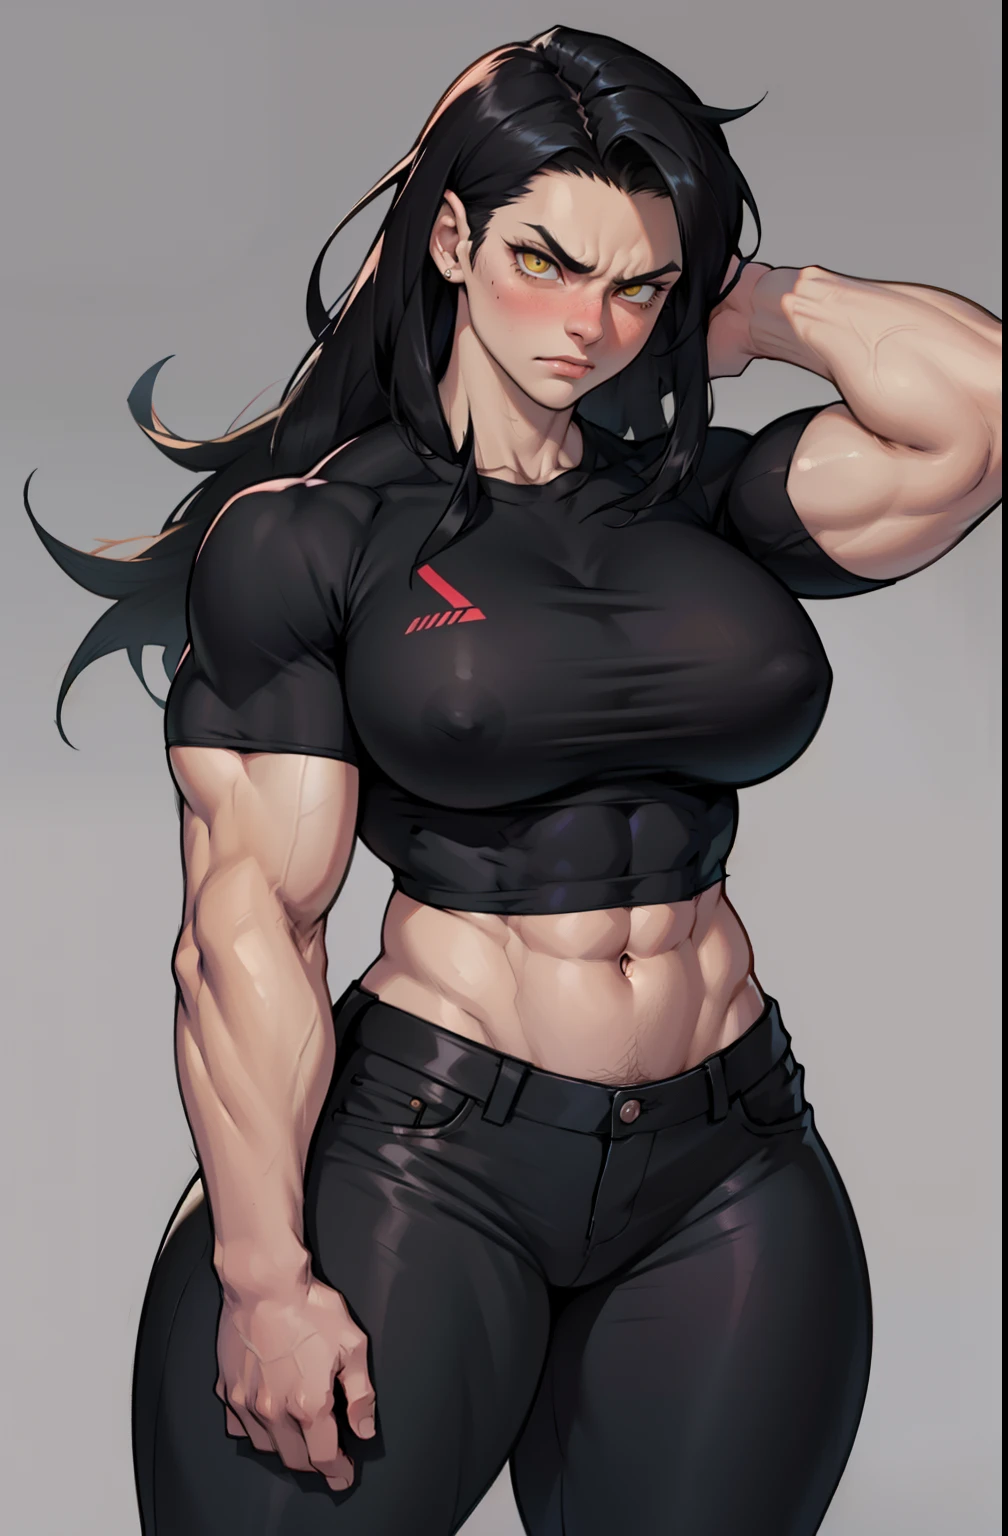 portrait of a bodybuilder woman, muscular female, abs, veiny arms, big arms  - SeaArt AI